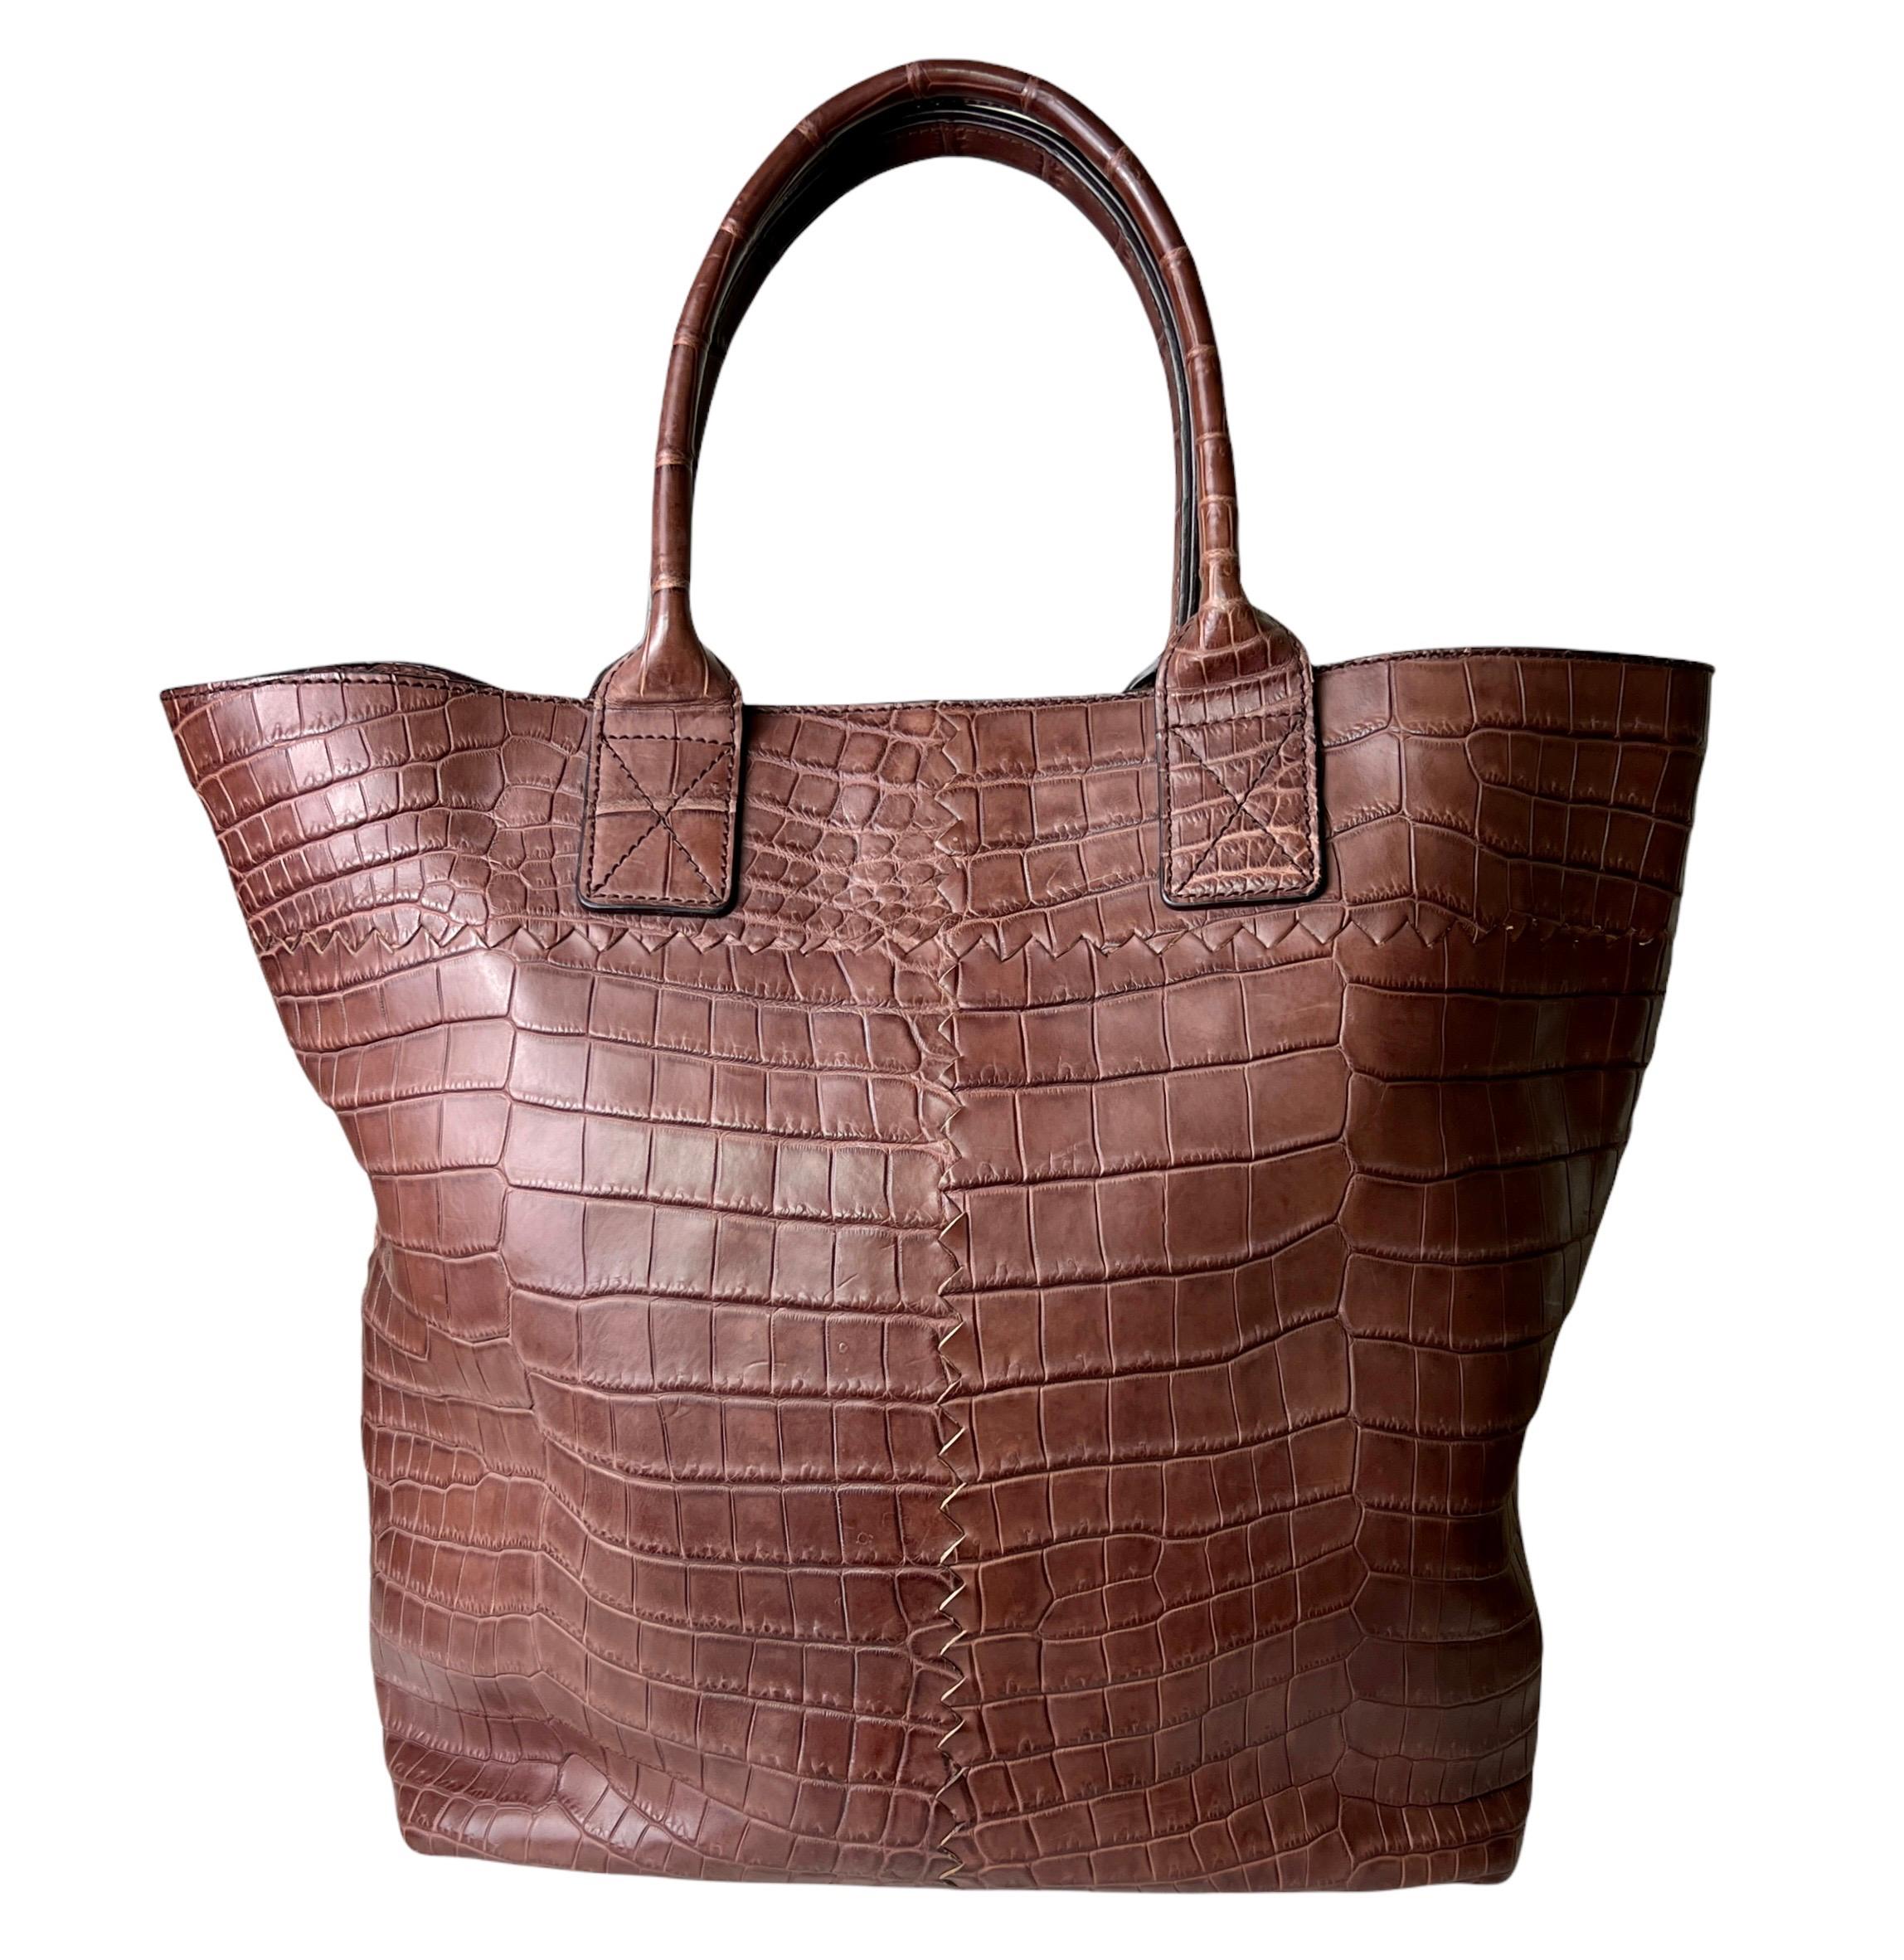 One of the most luxurious pieces existing!
Bottega Veneta Tote Bag from the exotic skin collection
Only very few pieces were produced of this gorgeous bag 
Exclusively sold in flagship stores to a selected clientele by order
A timeless piece in a